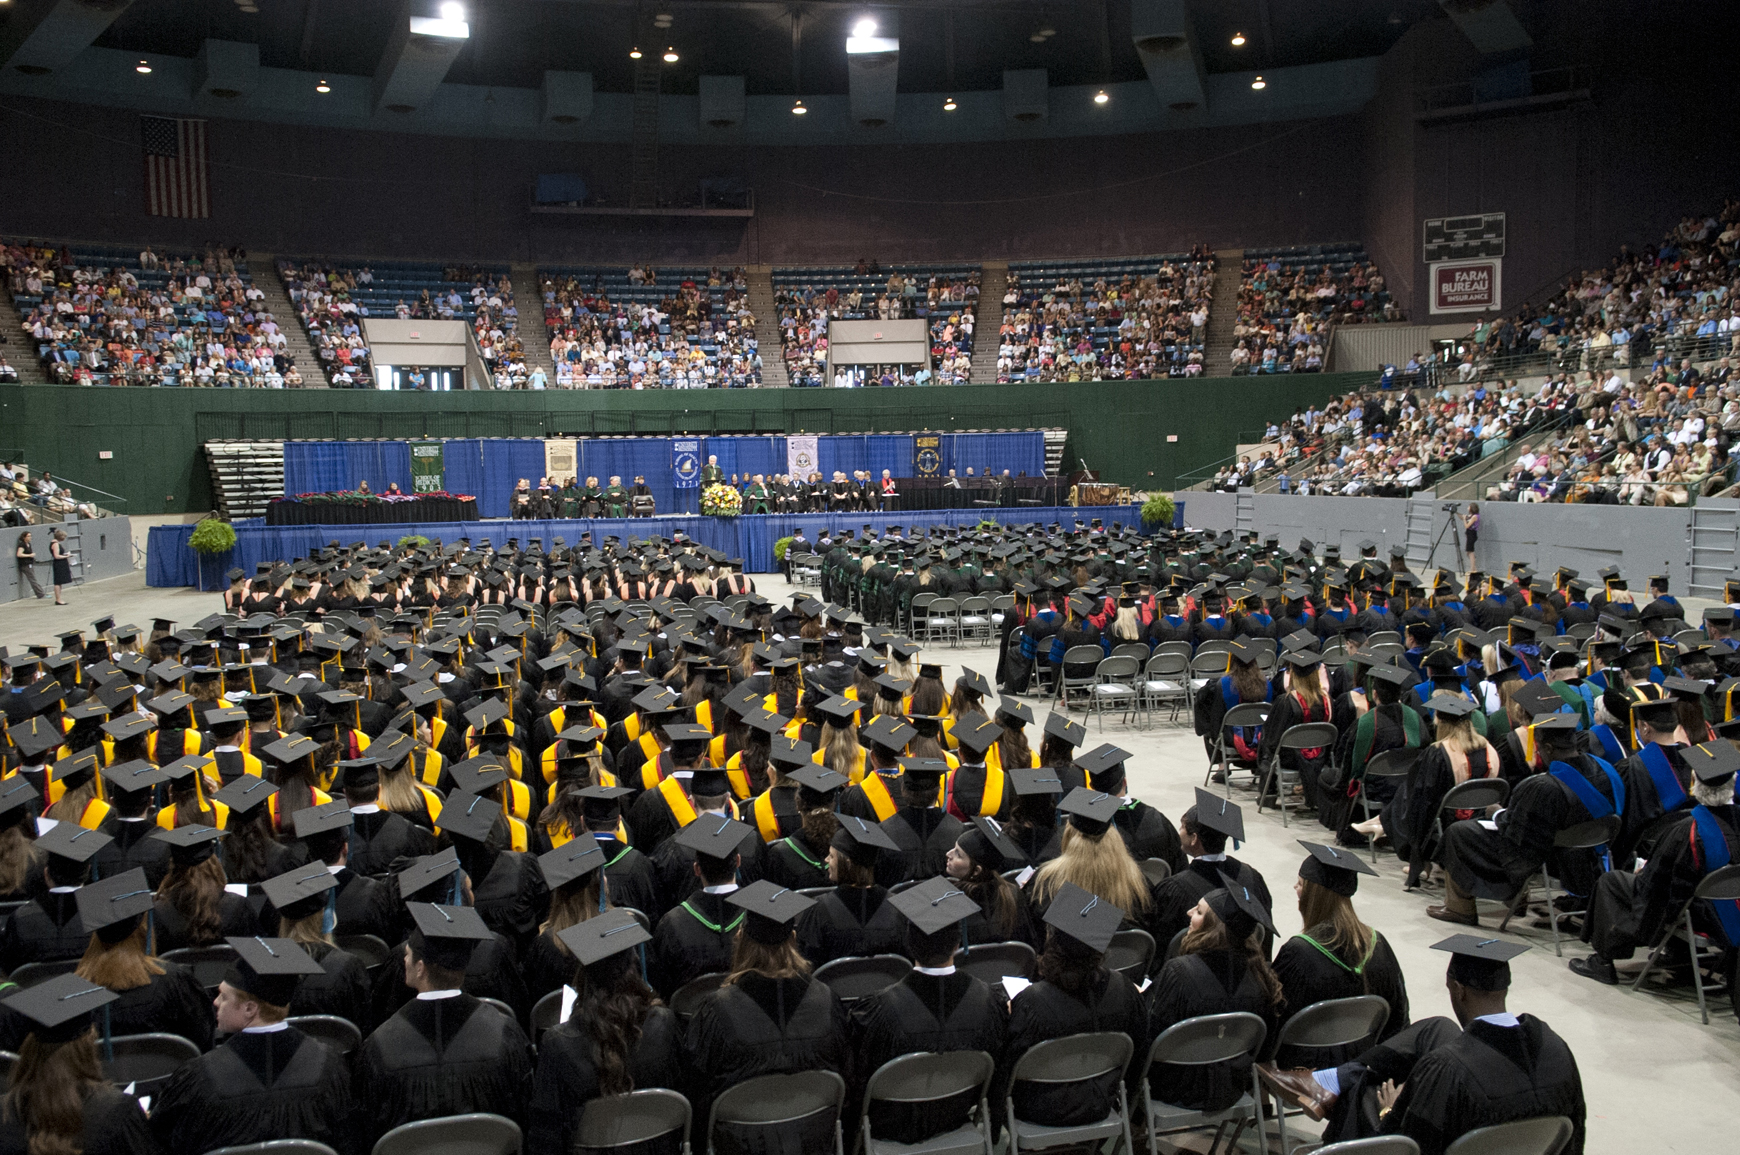 Thousands gathered to cheer on loved ones and share in the celebration of the University of Mississippi Medical Center's 58th annual commencement ceremonies May 23 at the Mississippi Coliseum in Jackson. A record 846 students received degrees in the health professions.